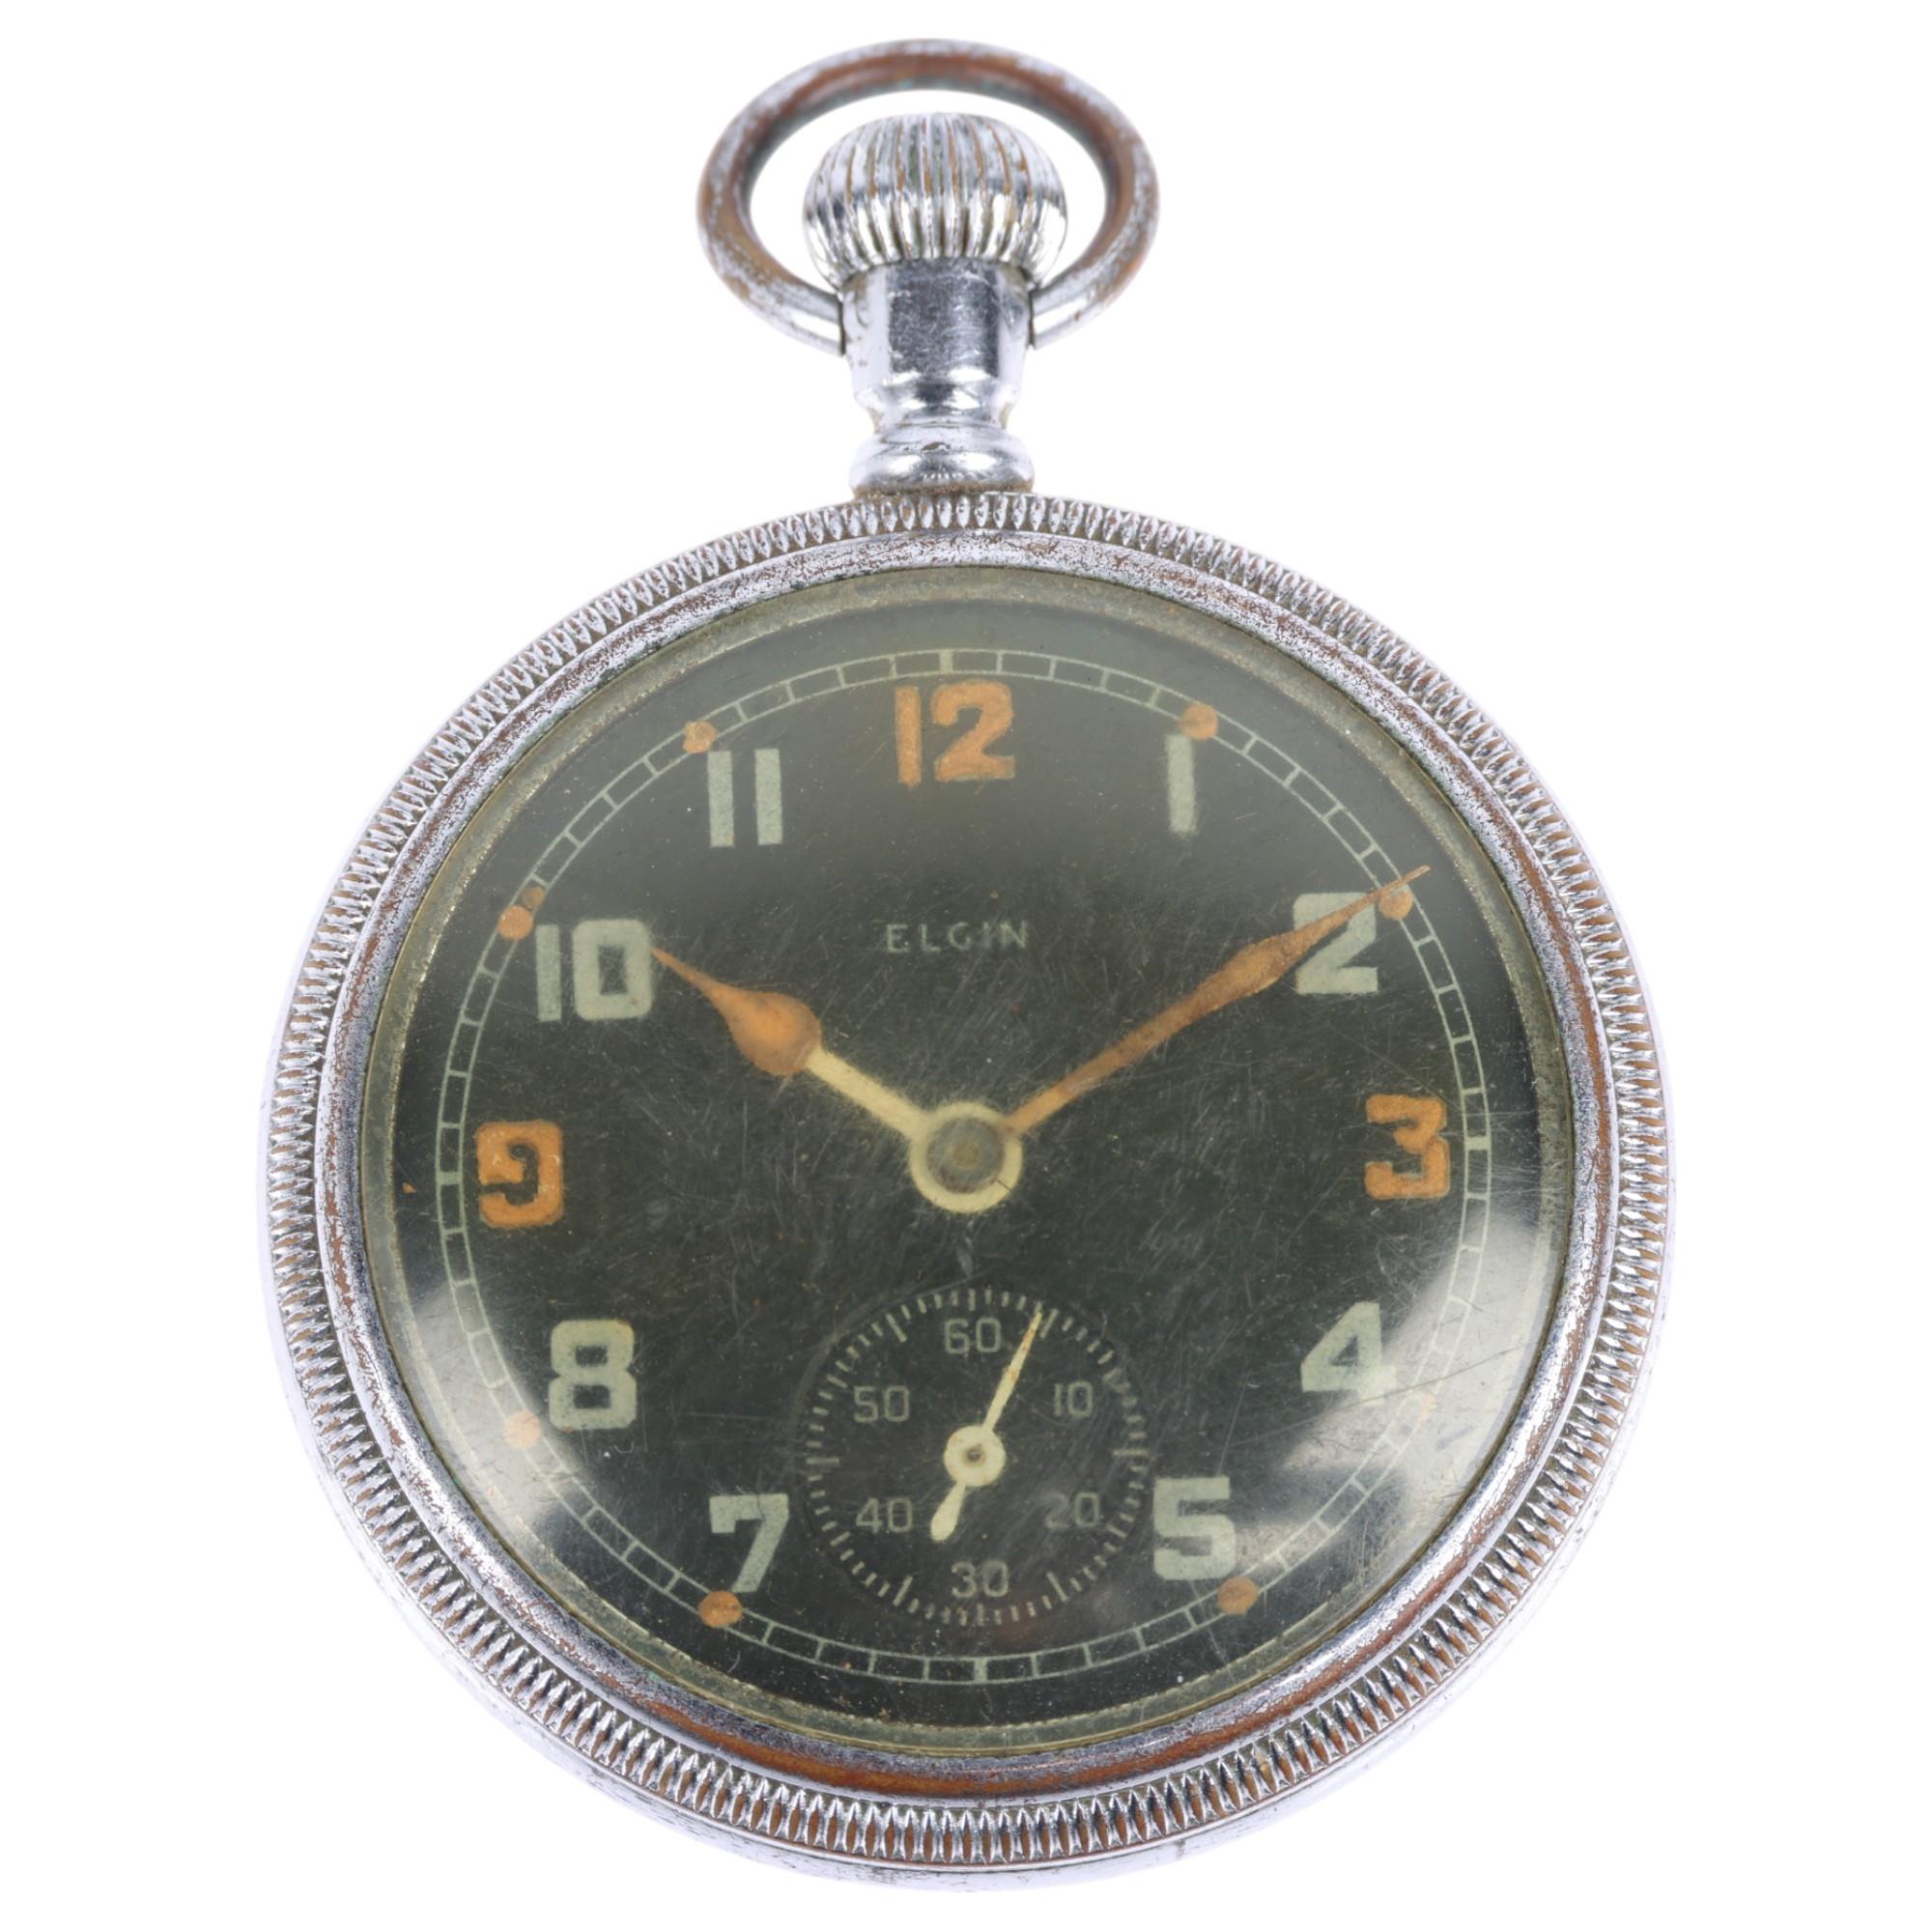 ELGIN - a Second World War Period nickel plated open-face keyless pocket watch, black dial with